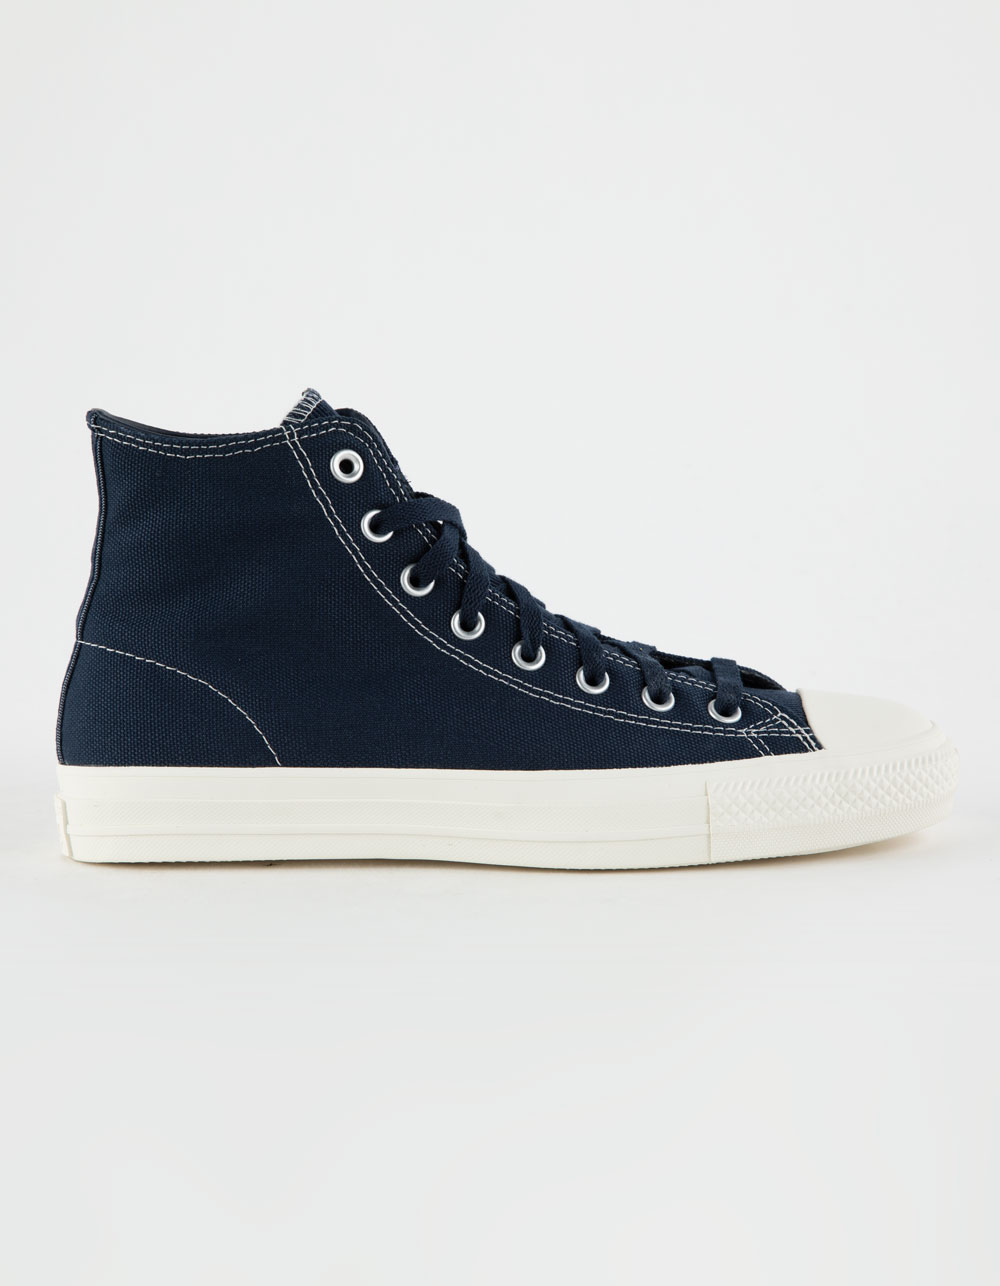 CONVERSE Chuck Taylor All Star Pro High Top Shoes - NAVY/WHITE | Tillys